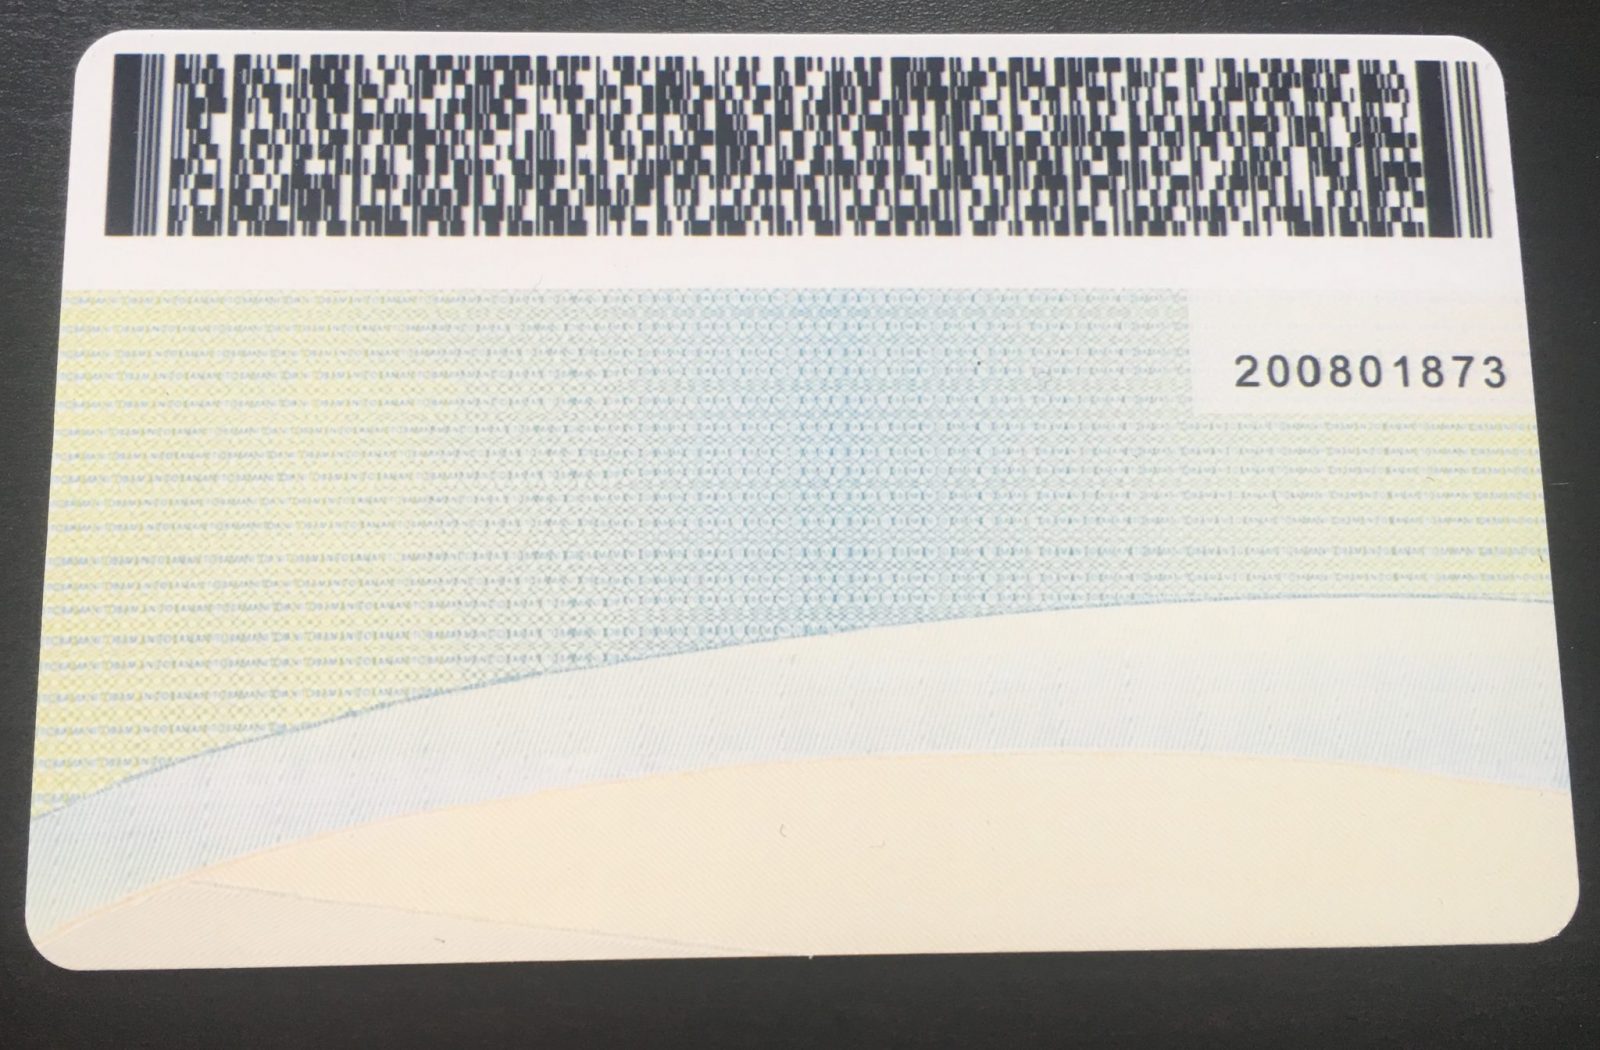 Drivers license barcode